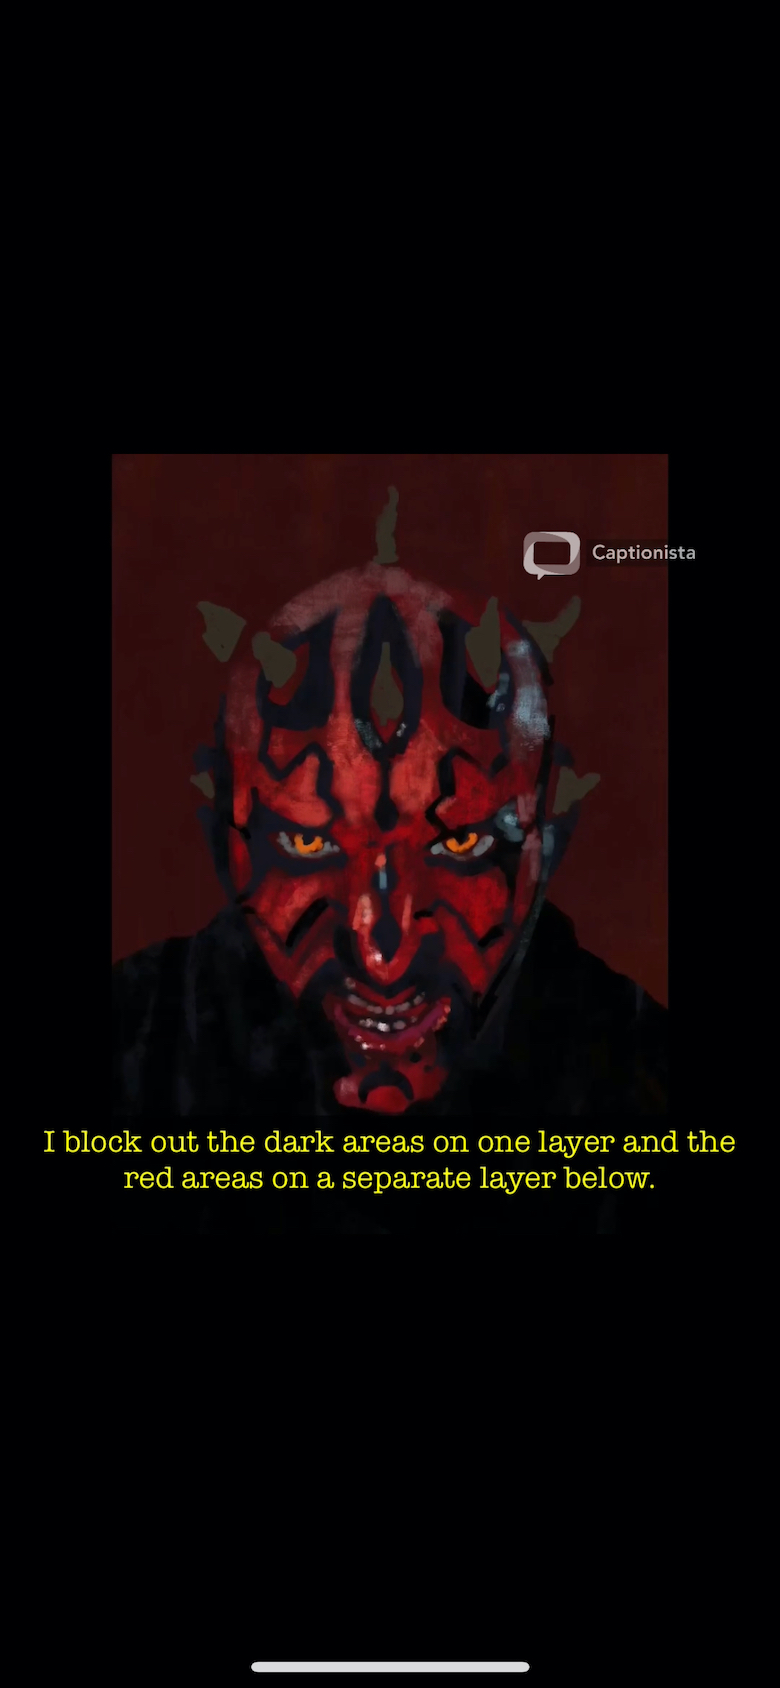 Screenshot of the final exported square video with subtitles